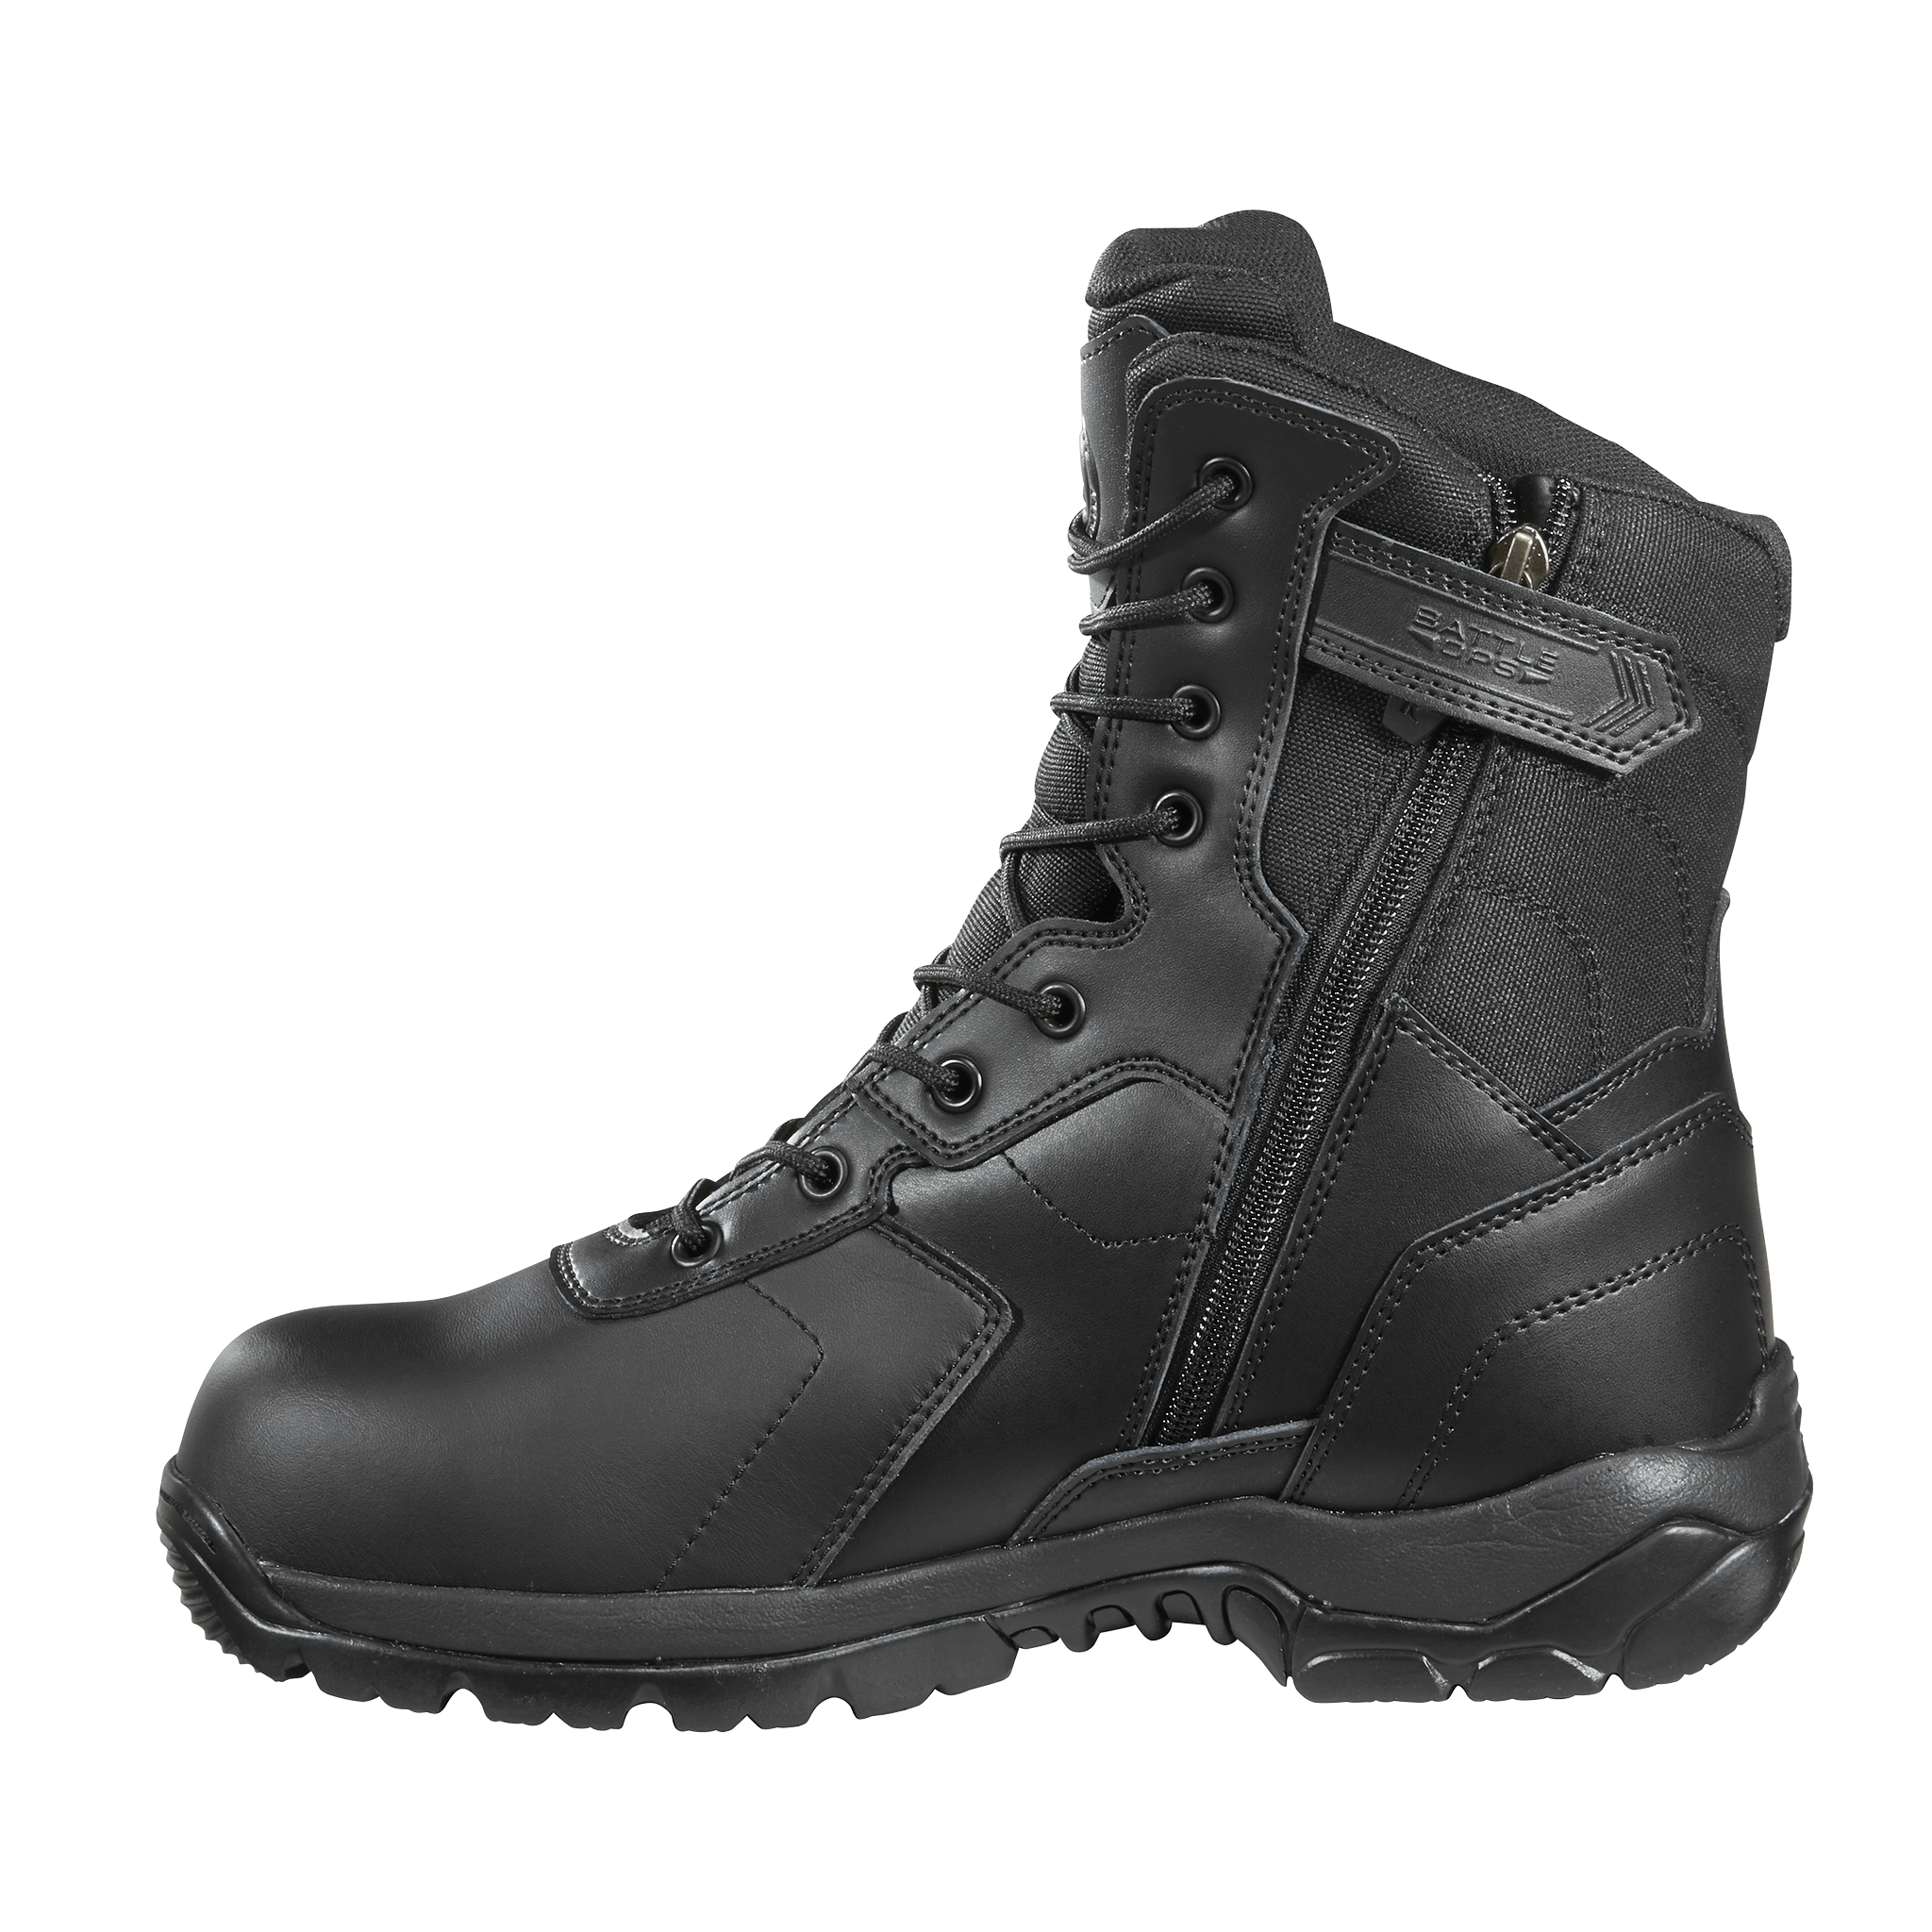 8-inch Waterproof Tactical Boot - Side Zip Non Safety Toe – Black Diamond